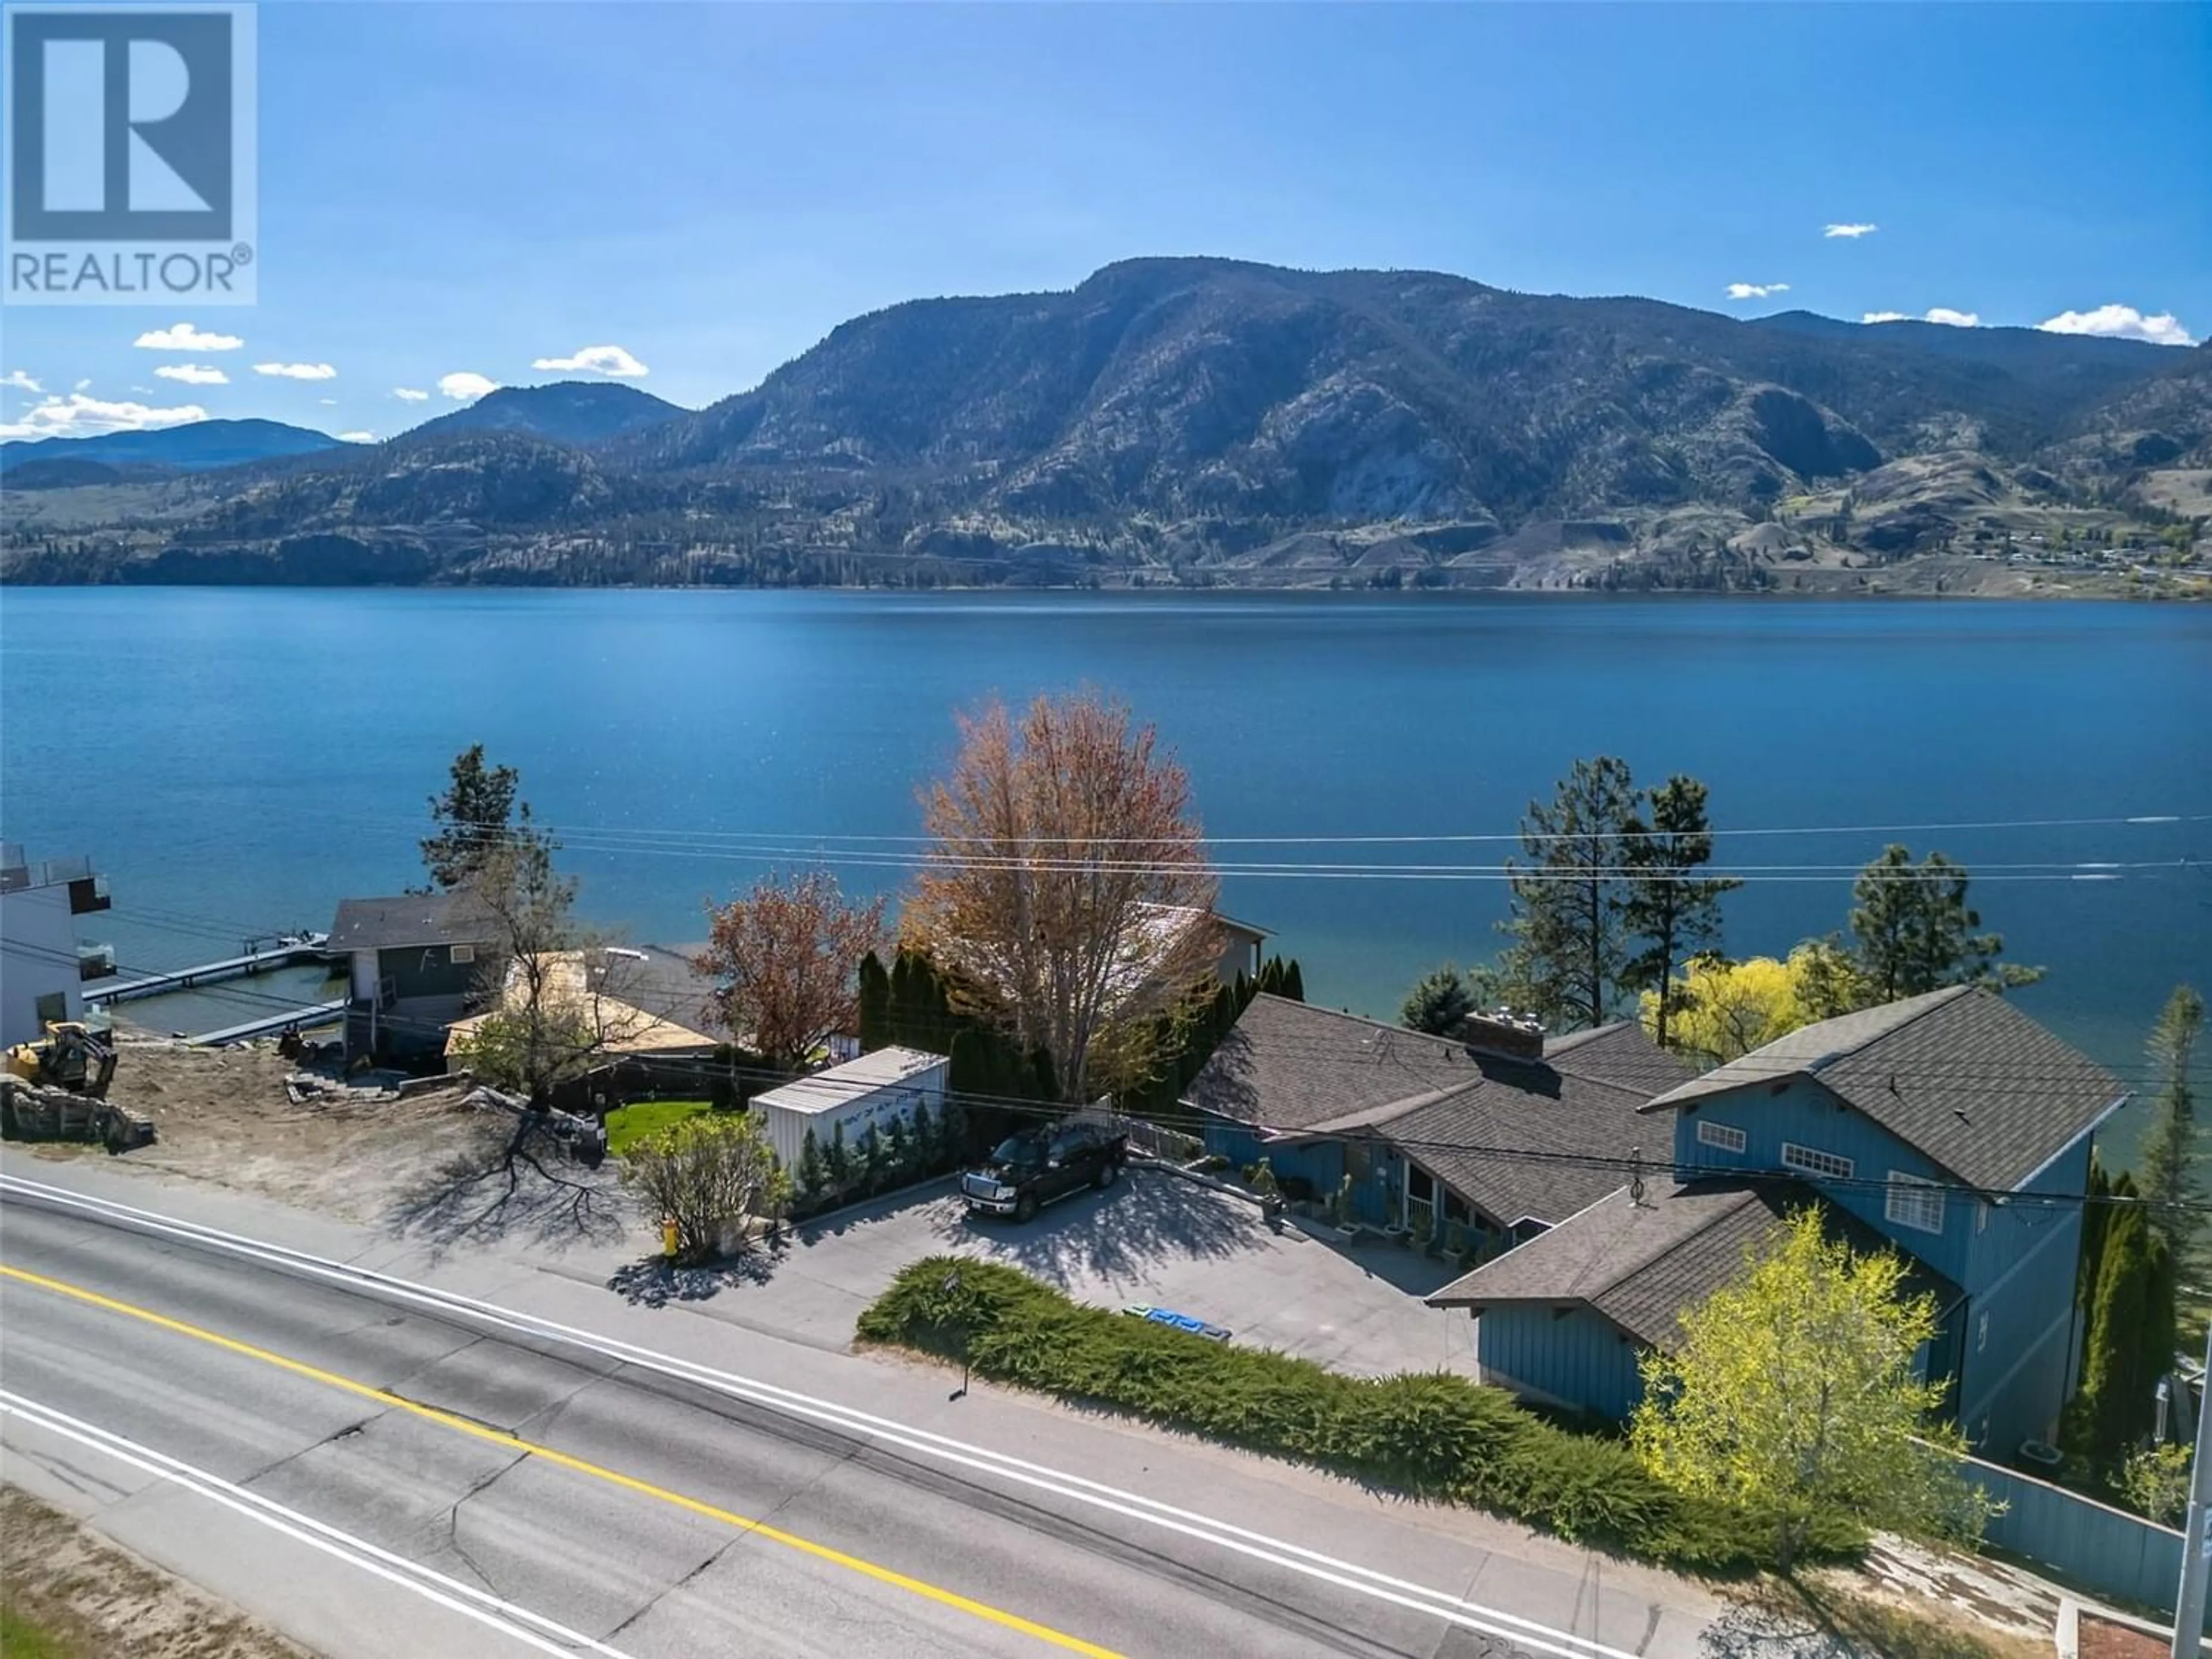 Lakeview for 4021 Lakeside Road, Penticton British Columbia V2A8W3